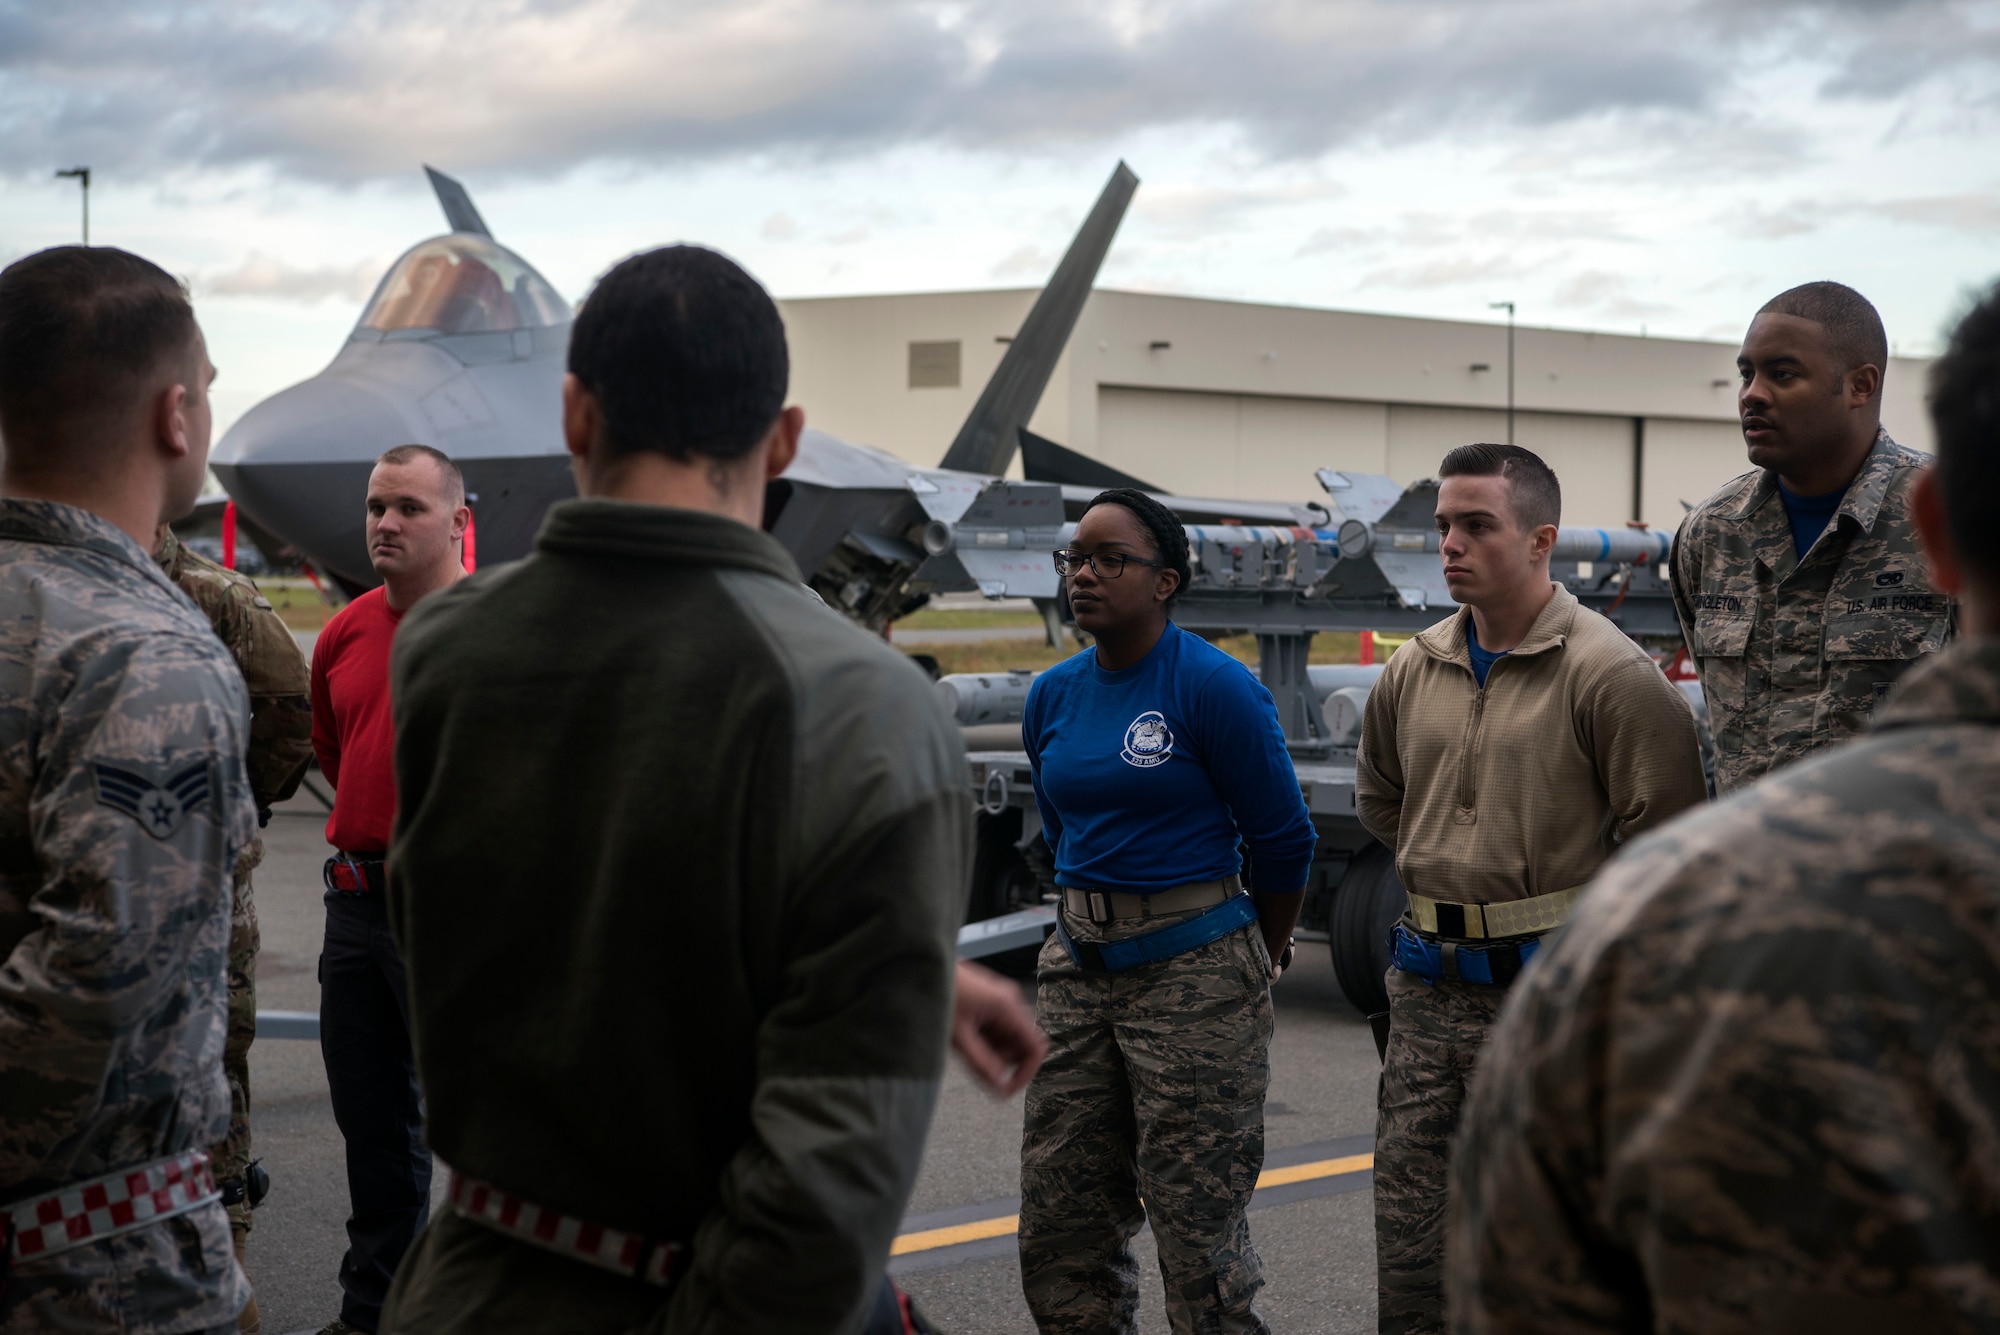 Service members from the 525th and 90th aircraft maintenance units prepare for the quarterly load competition at Joint Base Elmendorf-Richardson, Alaska, Oct. 26, 2018. During the competition, two teams tested their skills as load crew members for the F-22 Raptor. The event demonstrates the skill level and knowledge of all JBER aircraft maintainers.